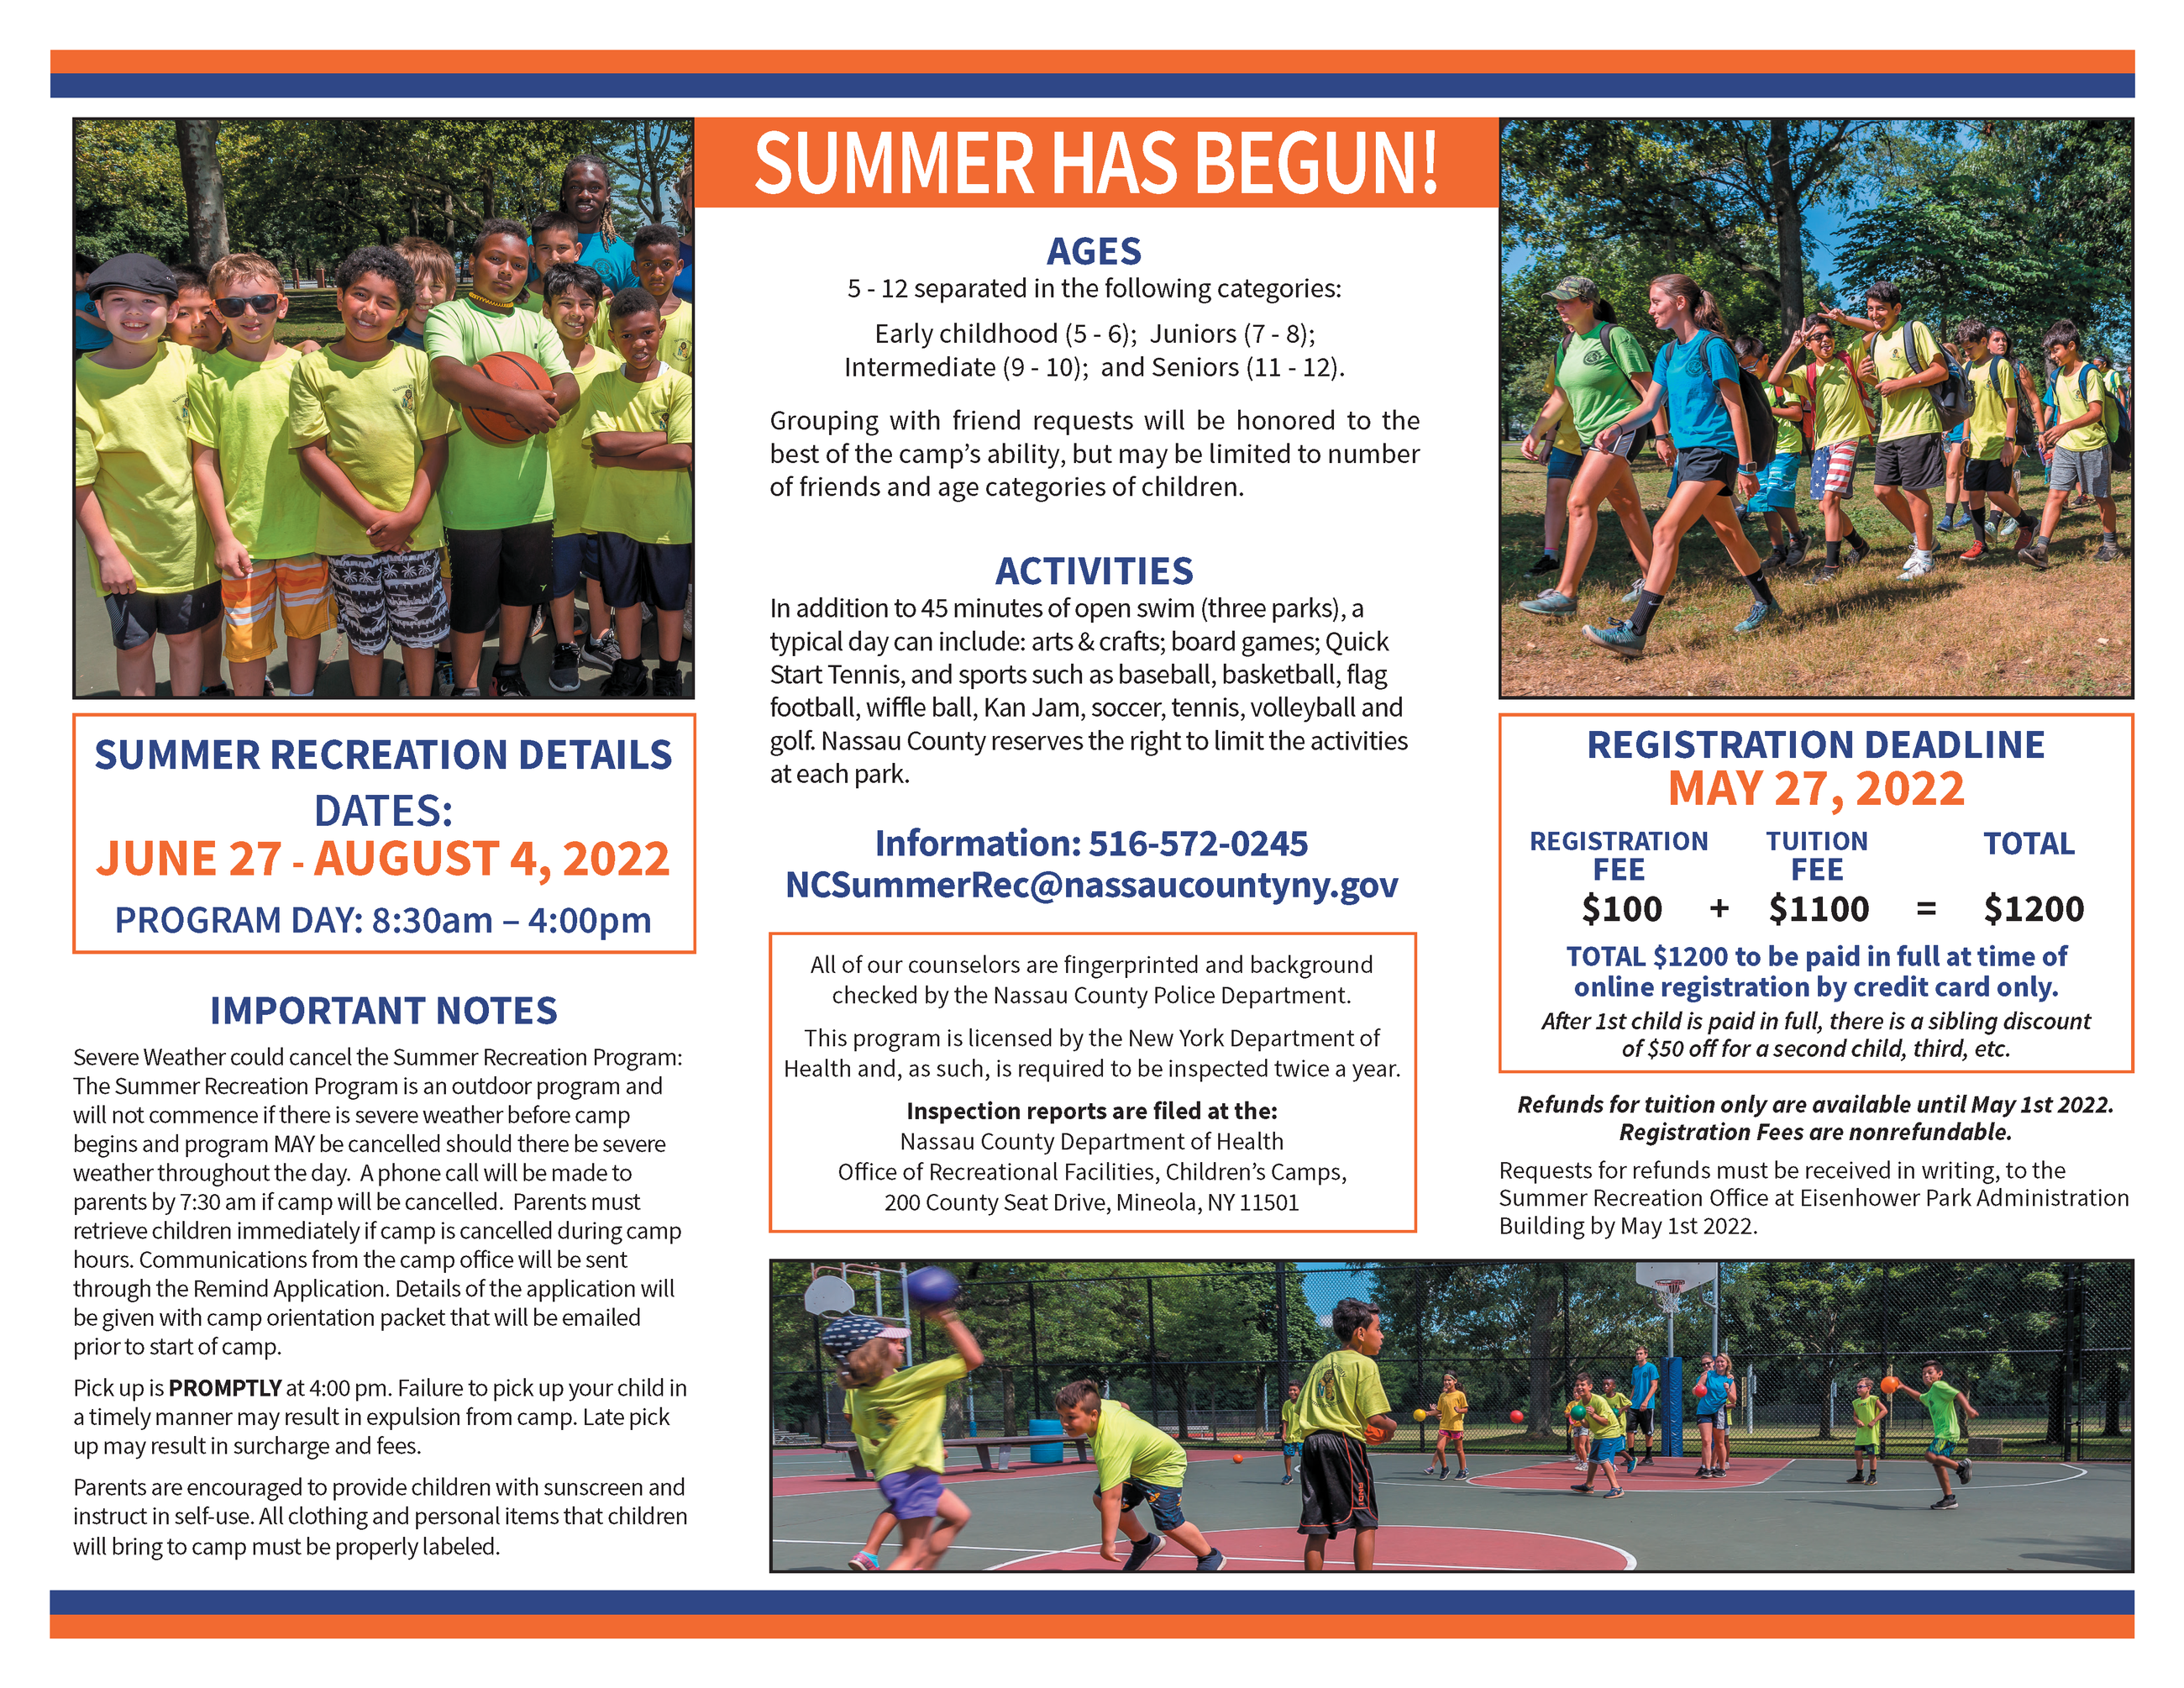 Summer Recreation Tri-Fold 2022 11 x 8.5_Page_2 Opens in new window